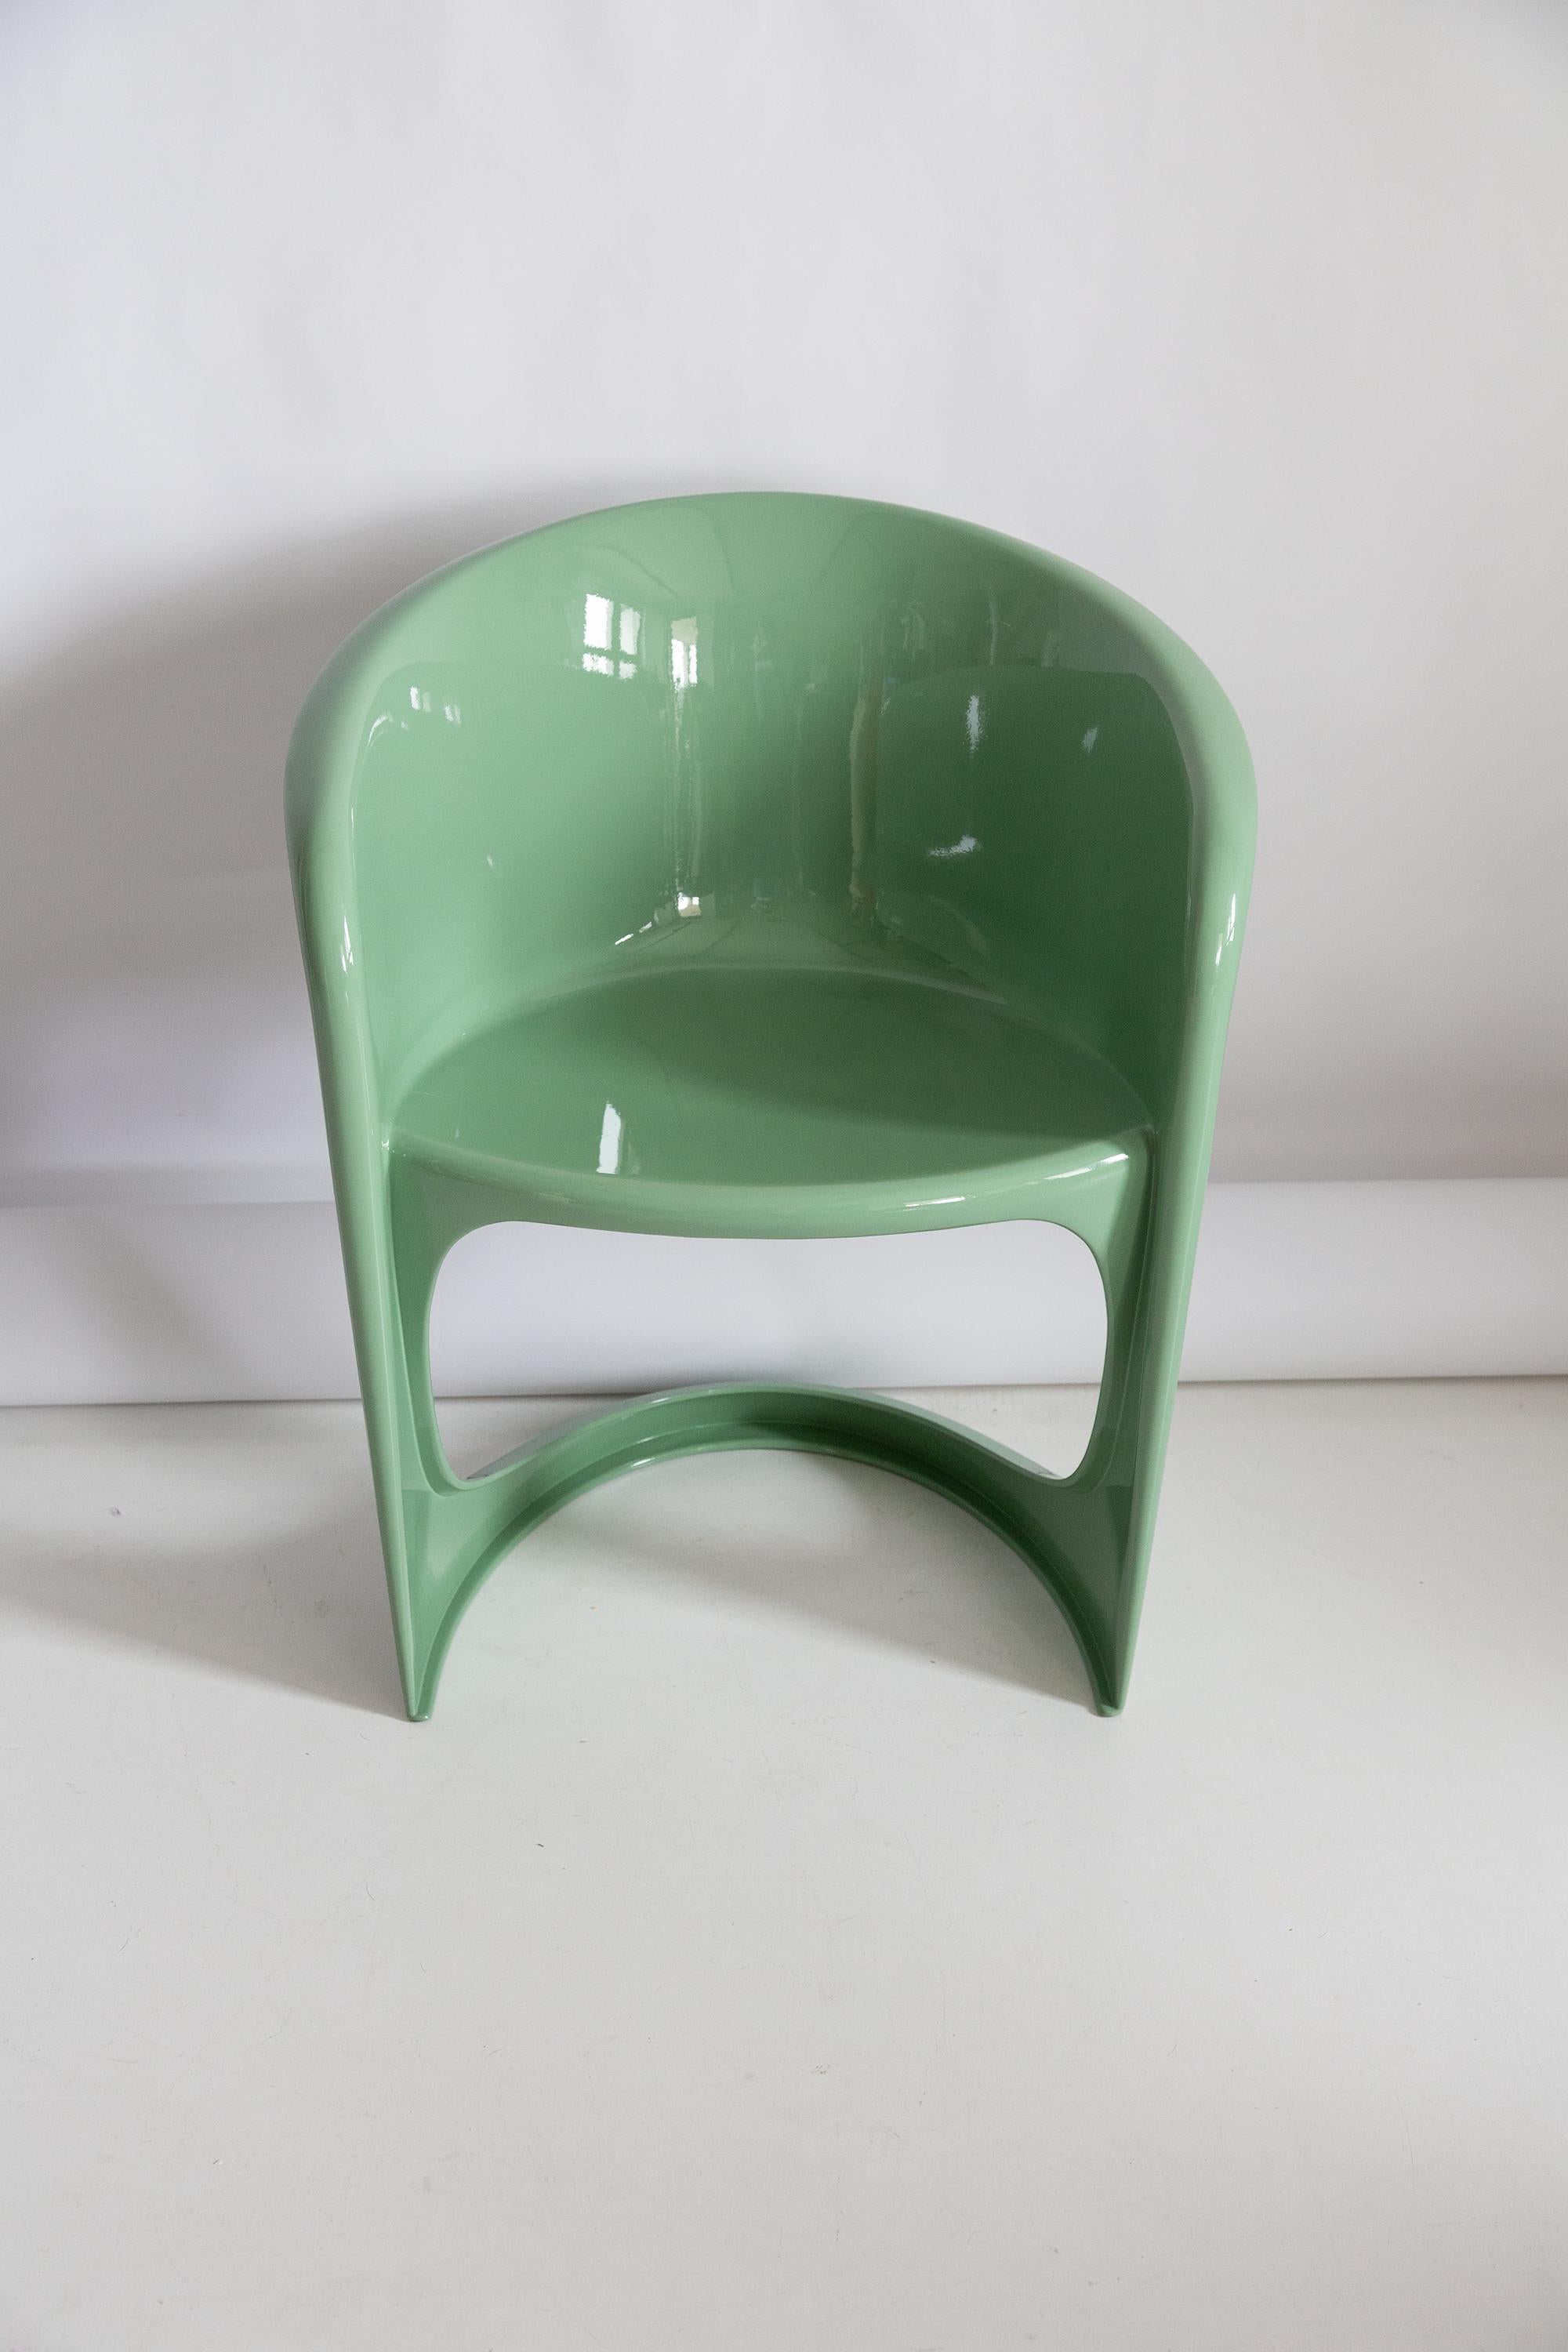 Hand-Painted Mid Century Glossy Mint Green Cado Chair, Steen Østergaard, 1974 For Sale